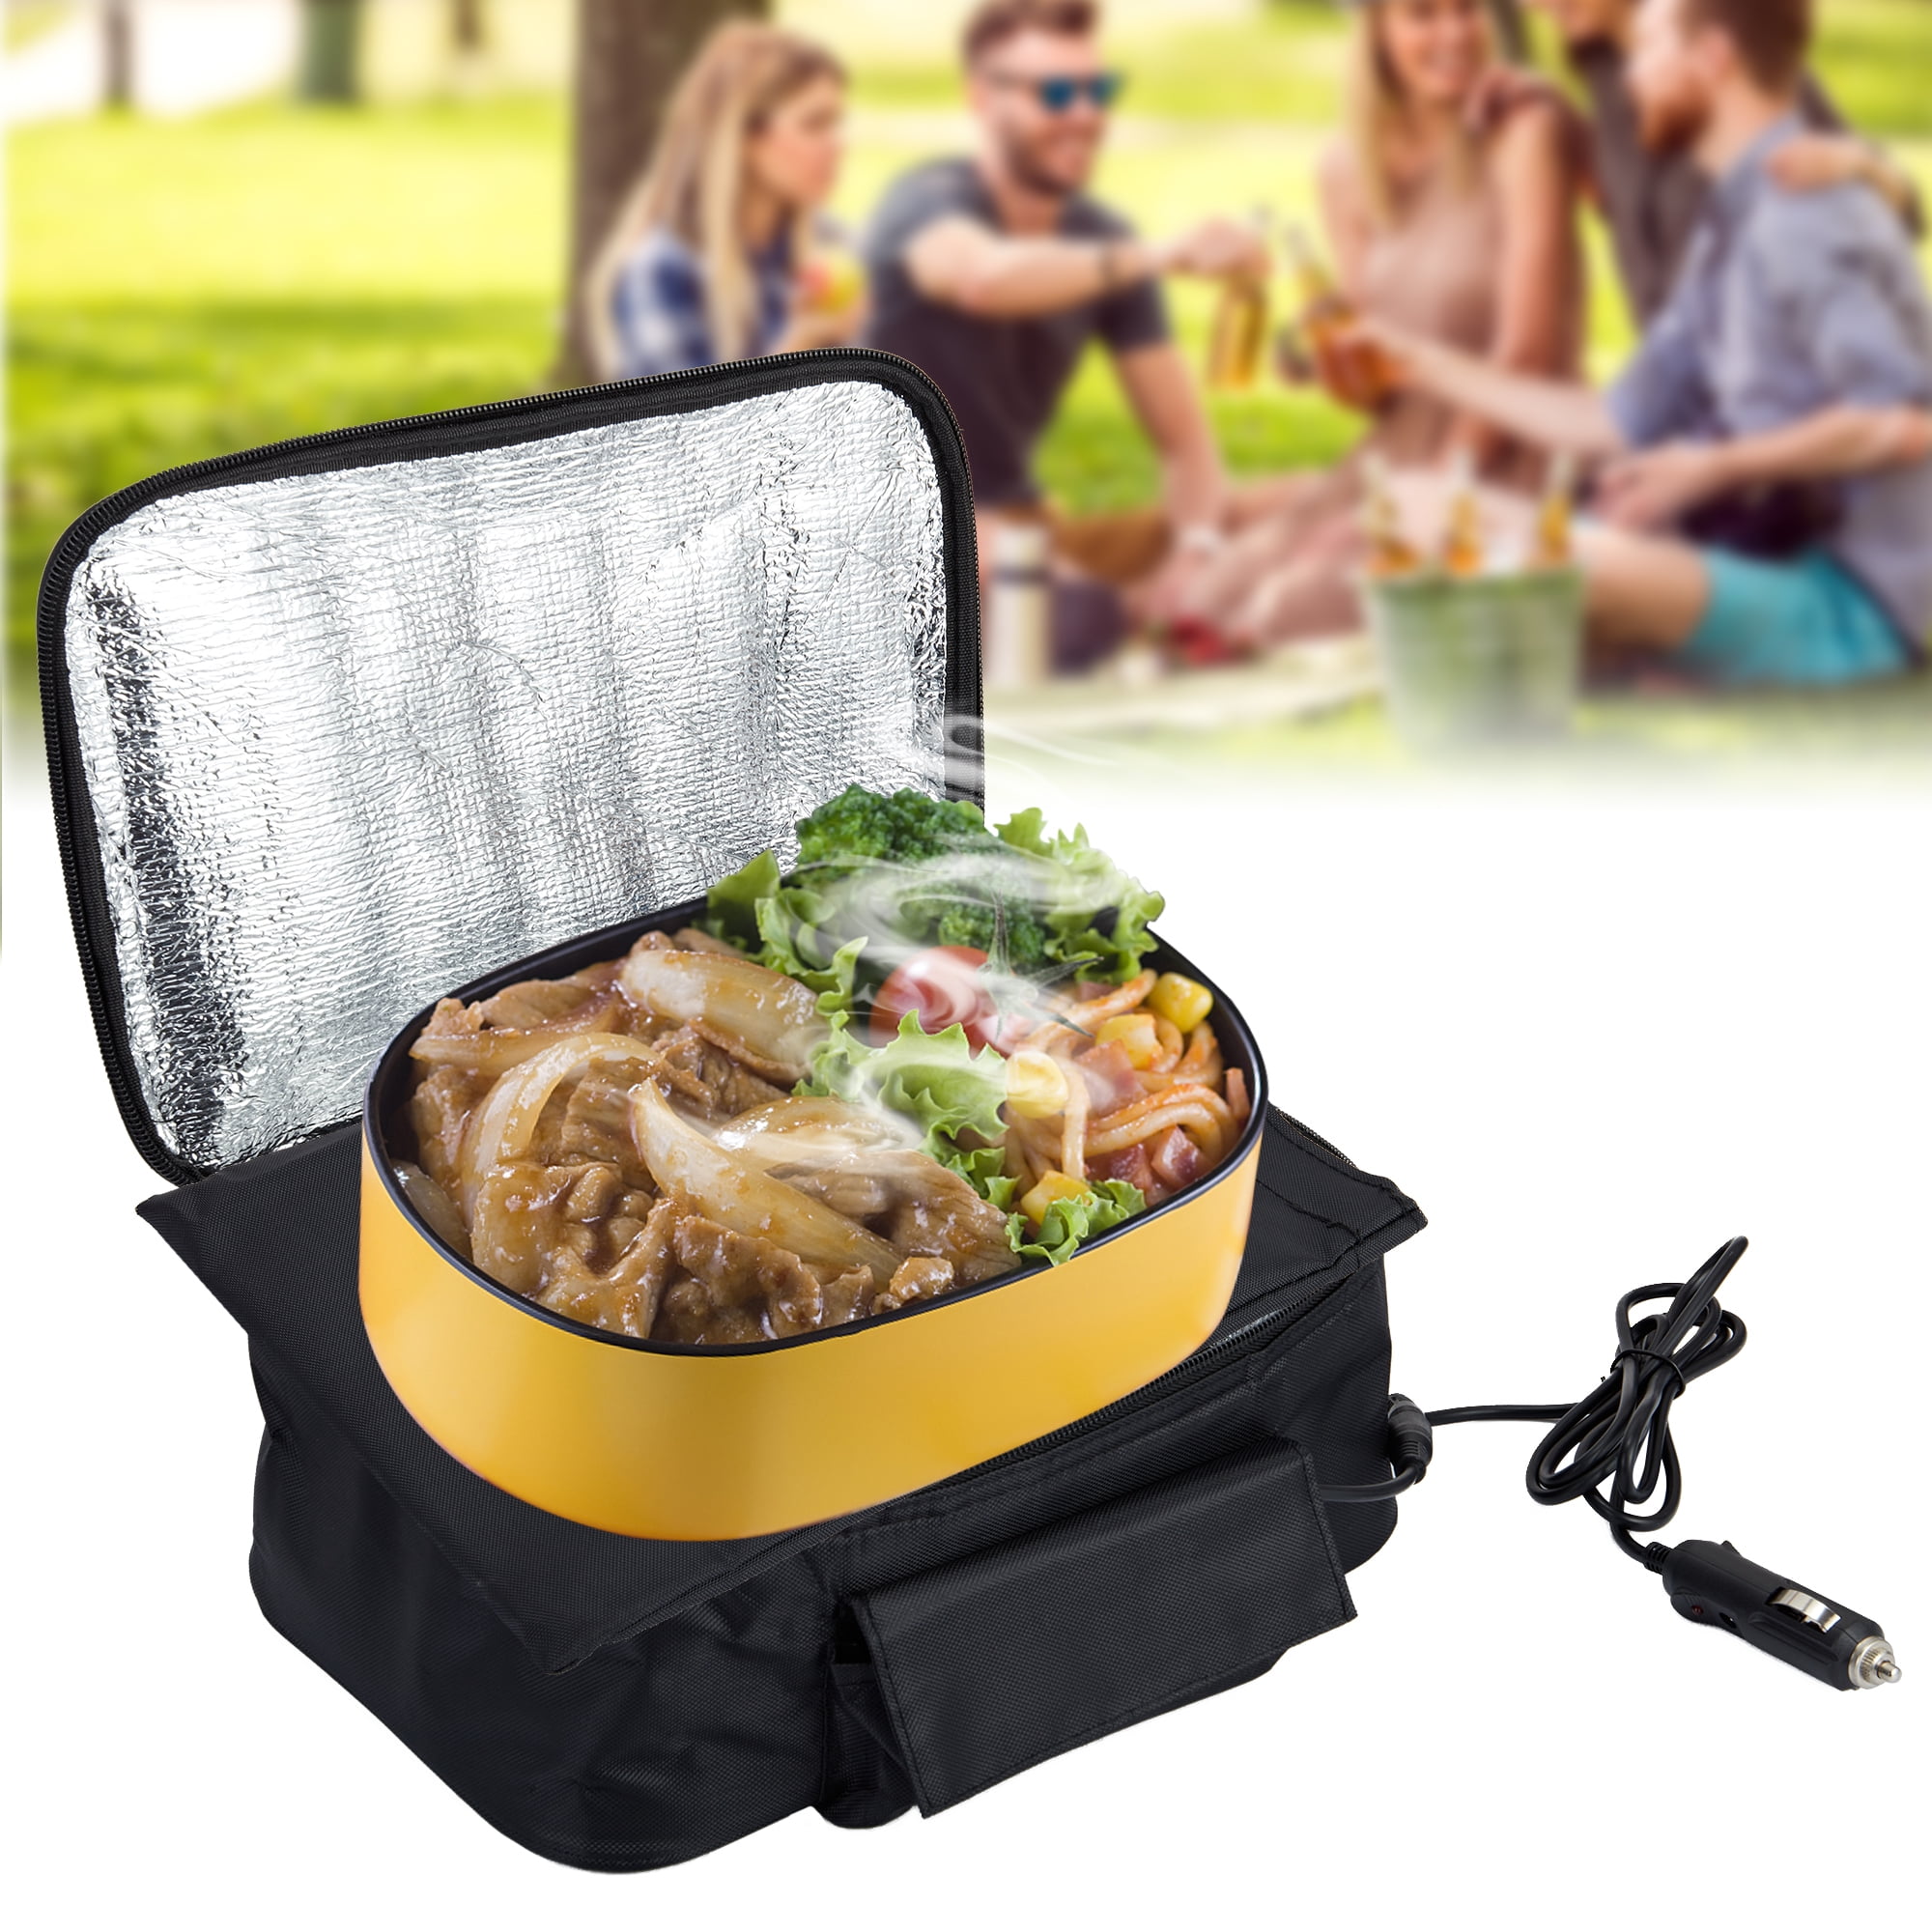 ZJchao Portable Oven, USB Heated Lunch Box Food Warmer Large Capacity  Waterproof Oxford Cloth Portab…See more ZJchao Portable Oven, USB Heated  Lunch